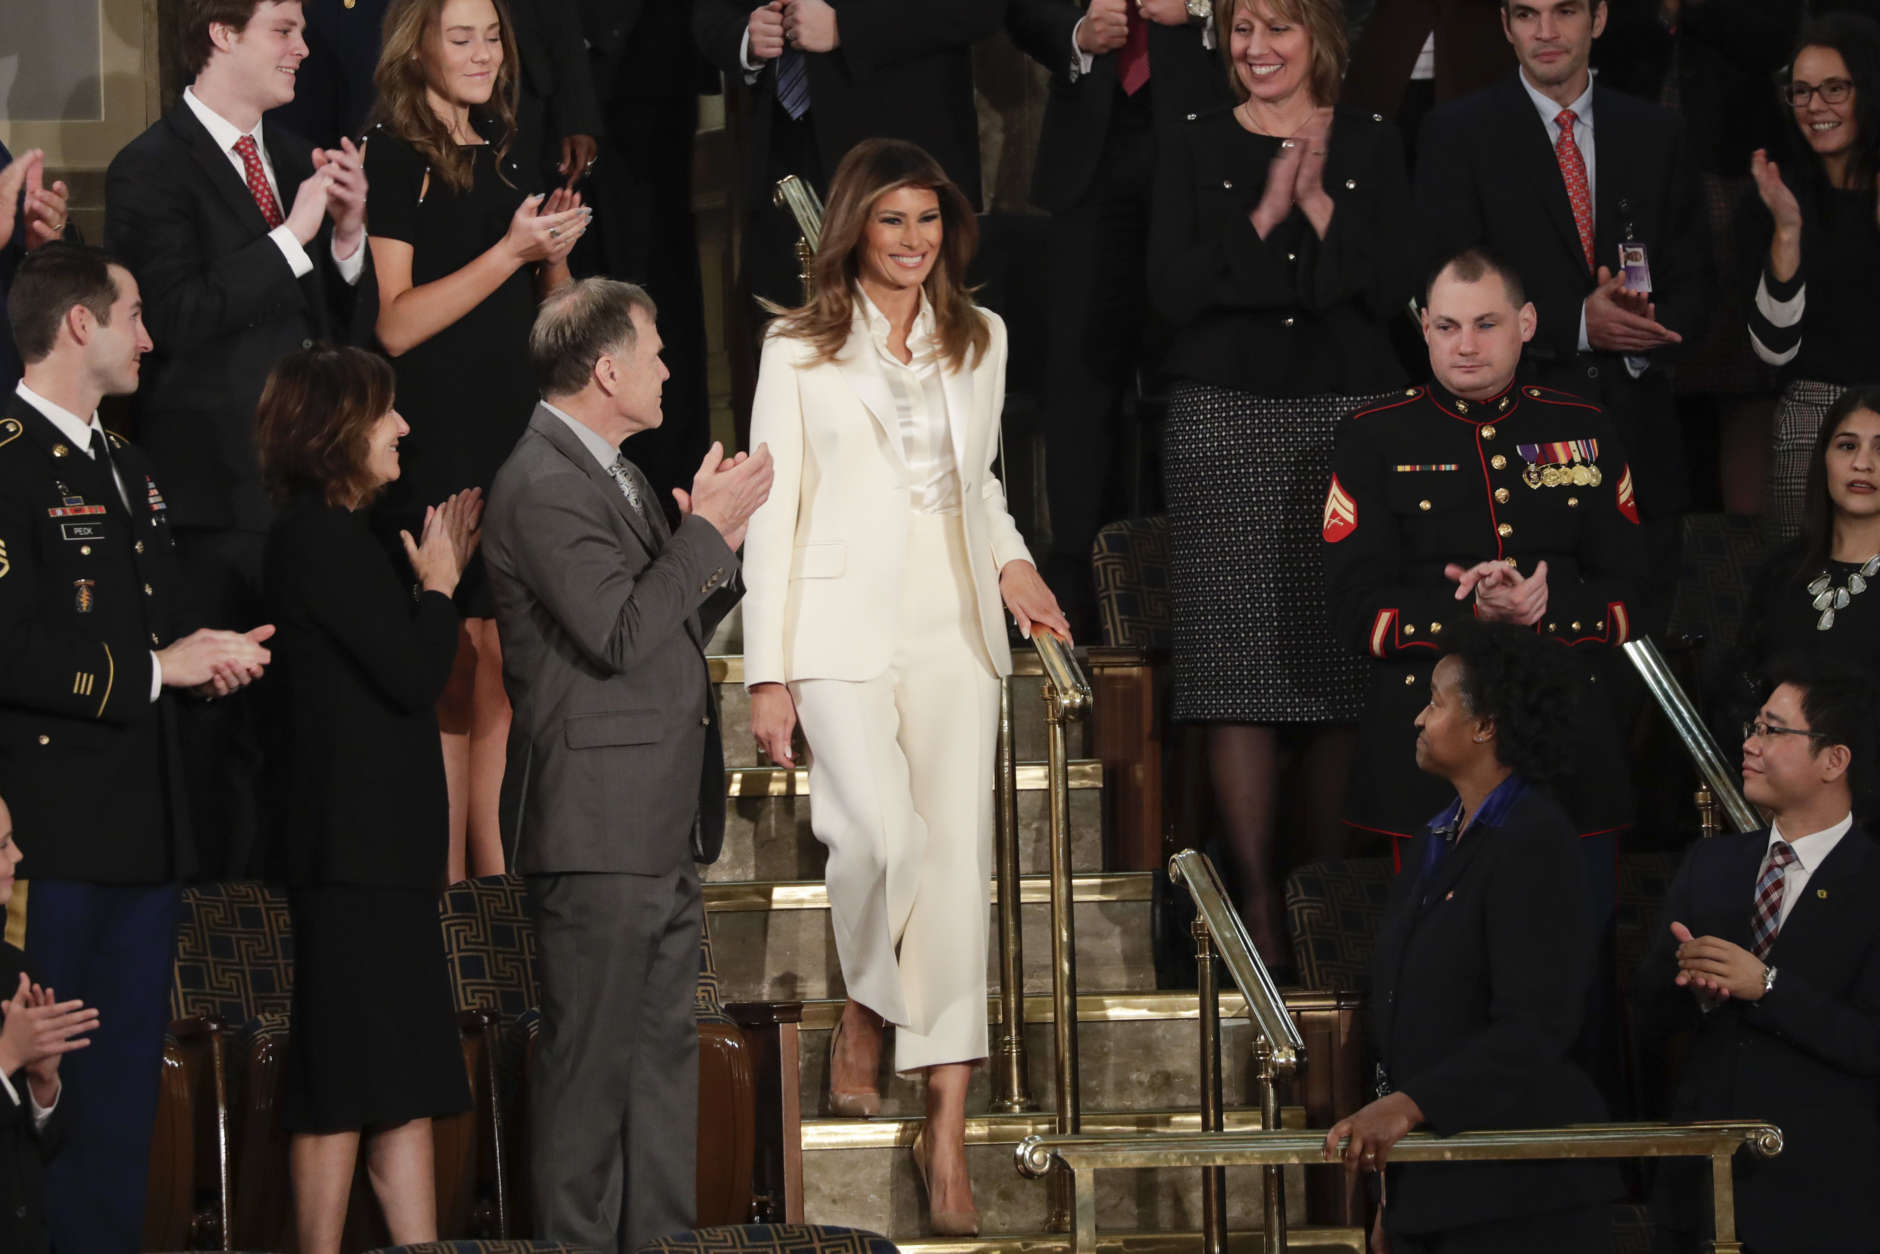 First lady Melania Trump arrives before the State of the Union address to a joint session of Congress on Capitol Hill in Washington, Tuesday, Jan. 30, 2018. (AP Photo/J. Scott Applewhite)